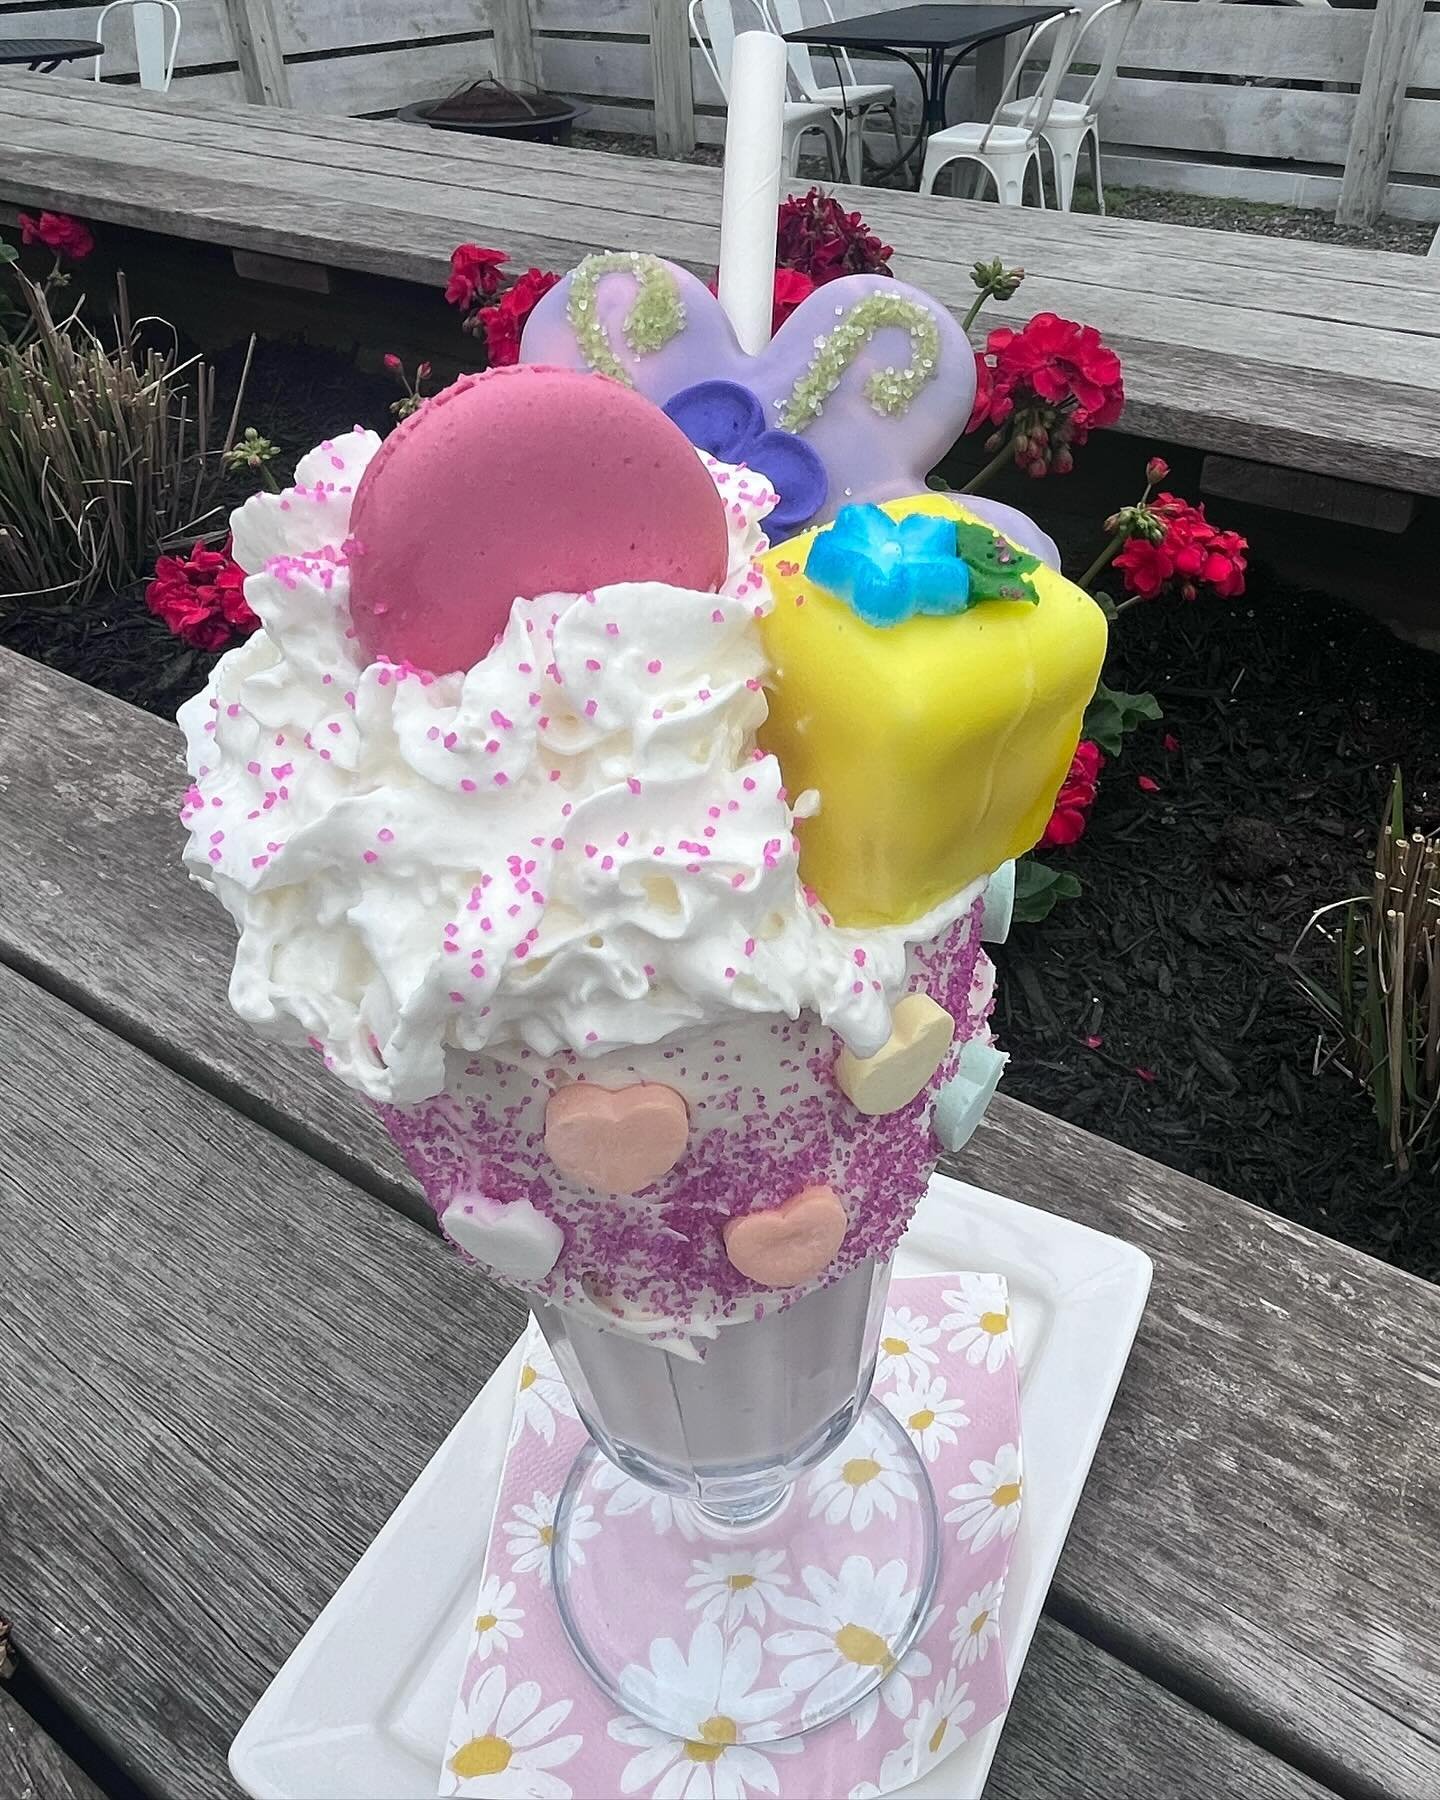 Searching for that perfect Mother&rsquo;s Day gift? How about time with her at the dinner table - and with an Amazing Shake, of course! #amazingshake #dessert #icecreamsundae #rosendaleny #mothersday #happymomsday #dinnerwithmom #burgersandbeer #fami